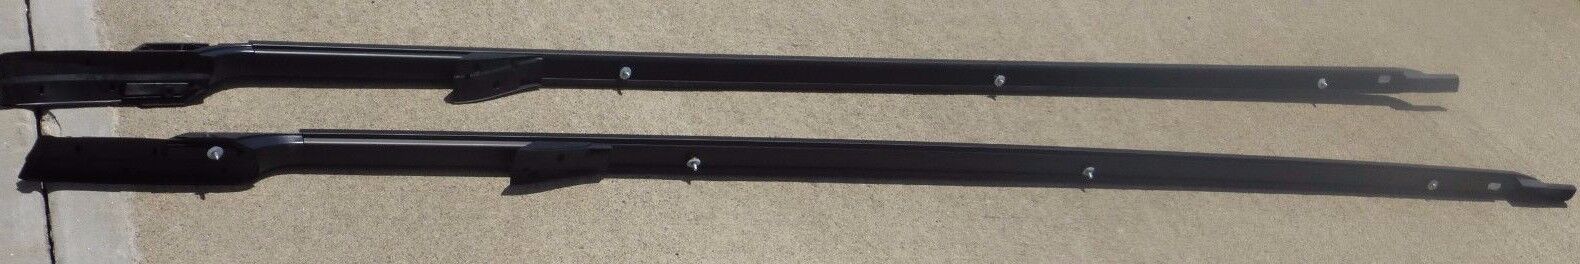 LR3 LR4 OEM Land Rover Black Extended Length Roof Rails Discovery 3 4 Brand New